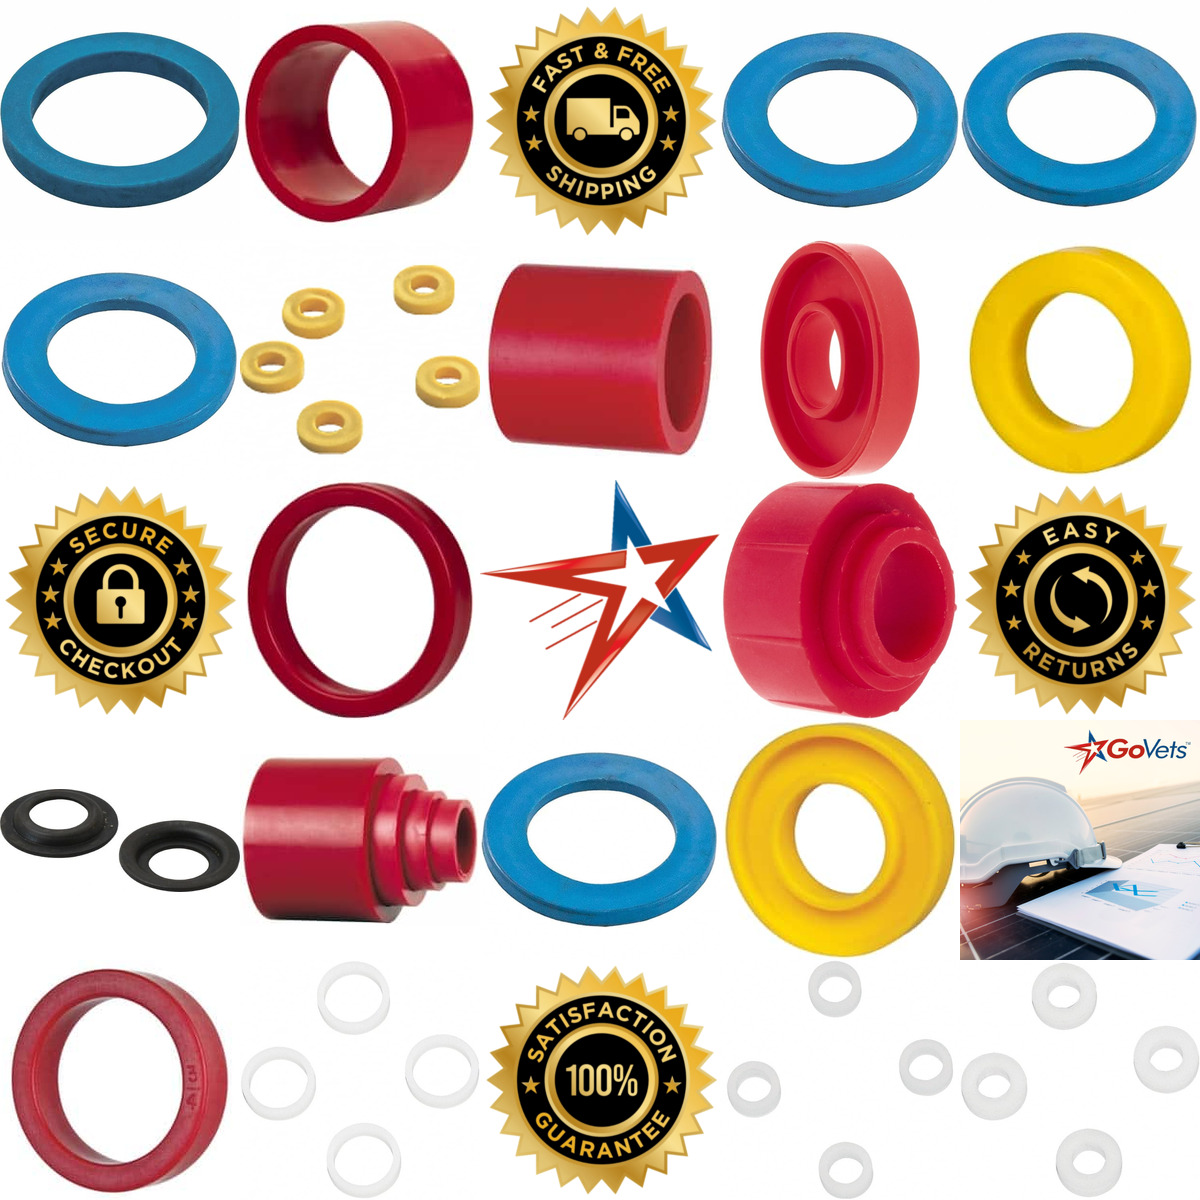 A selection of Wheel Bushings products on GoVets